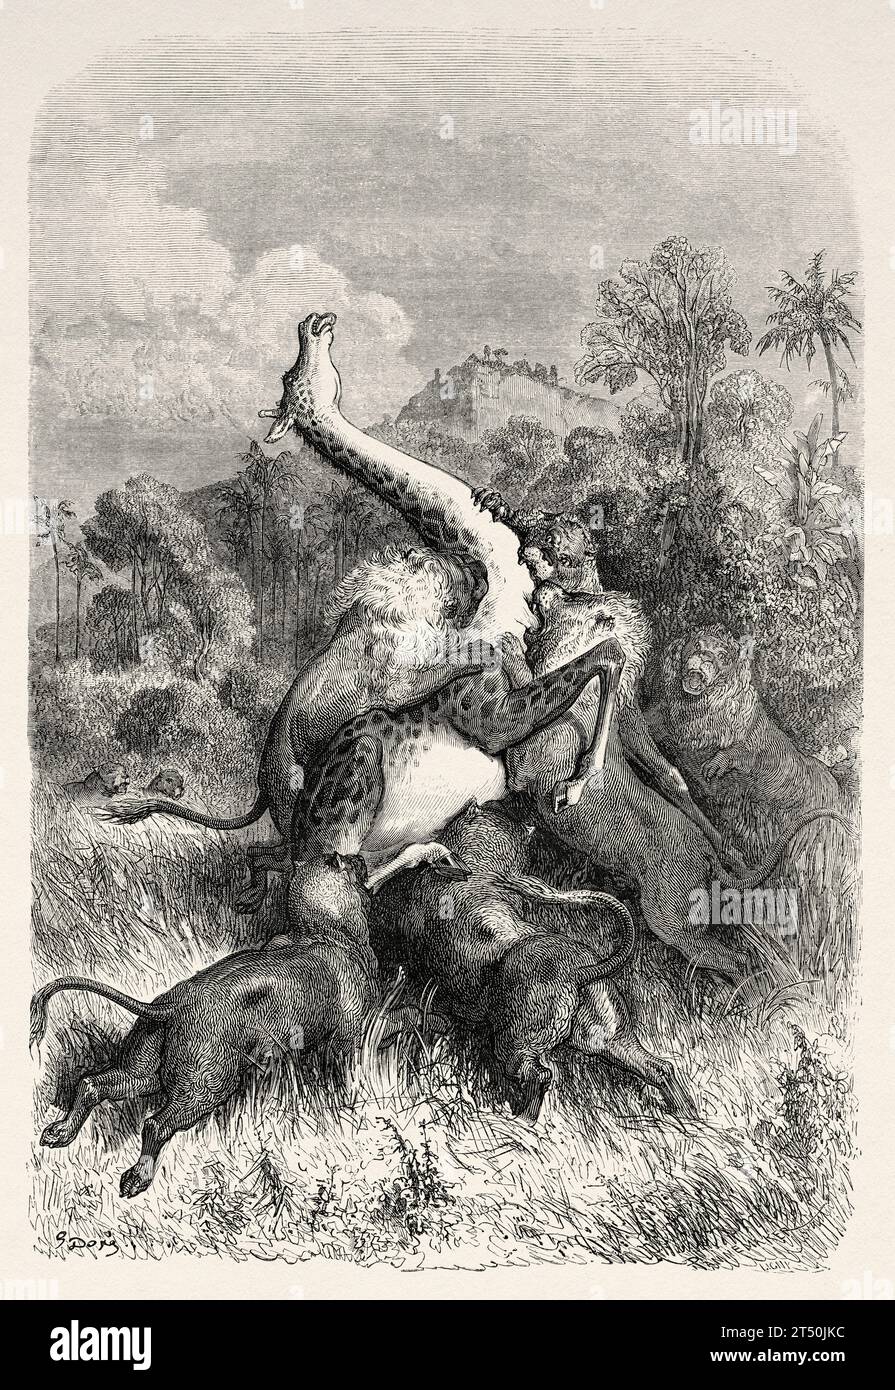 Lions attacking giraffe, Africa. Adventures and Hunts of the Traveler Charles John Andersson in Southern Africa from 1850 to 1860. Old 19th century illustration by Gustave Doré (1832 - 1883) from Le Tour du Monde 1860 Stock Photo